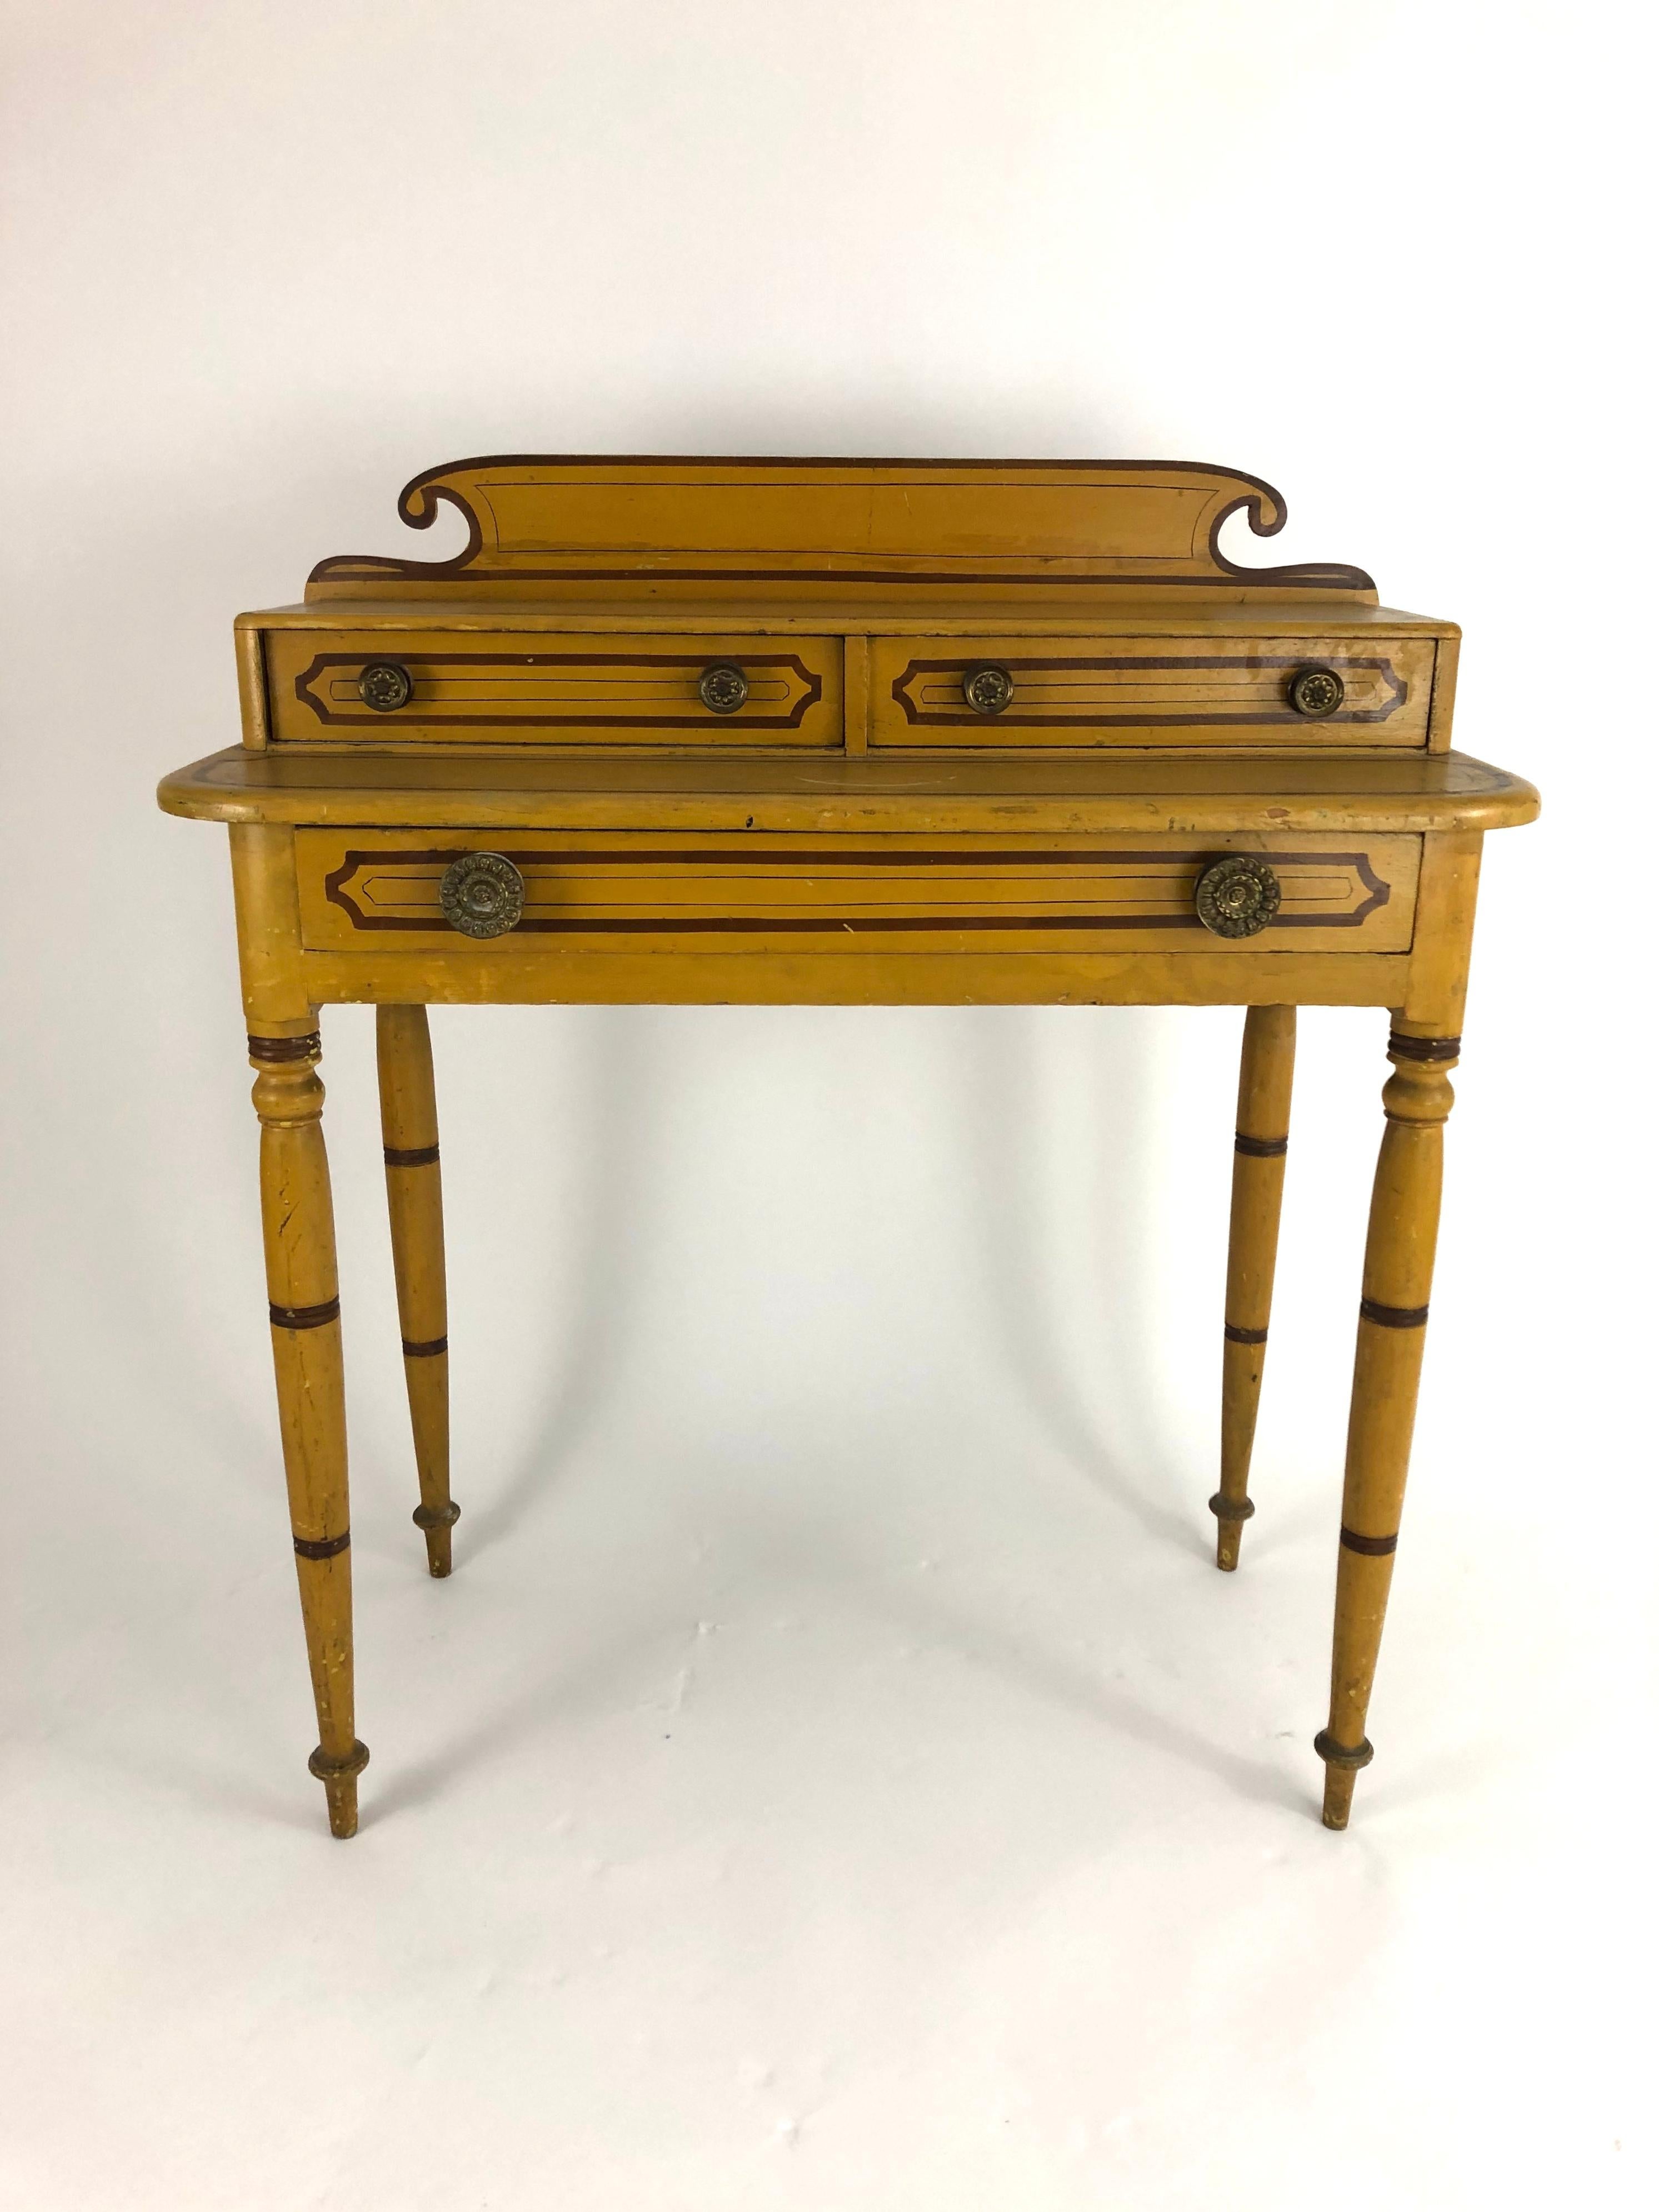 A 19th century American Country yellow painted pine dressing table, retaining its original painted decoration, with scrolled back splash over a superstructure containing two drawers above the tabletop with one long frieze drawer below, all supported